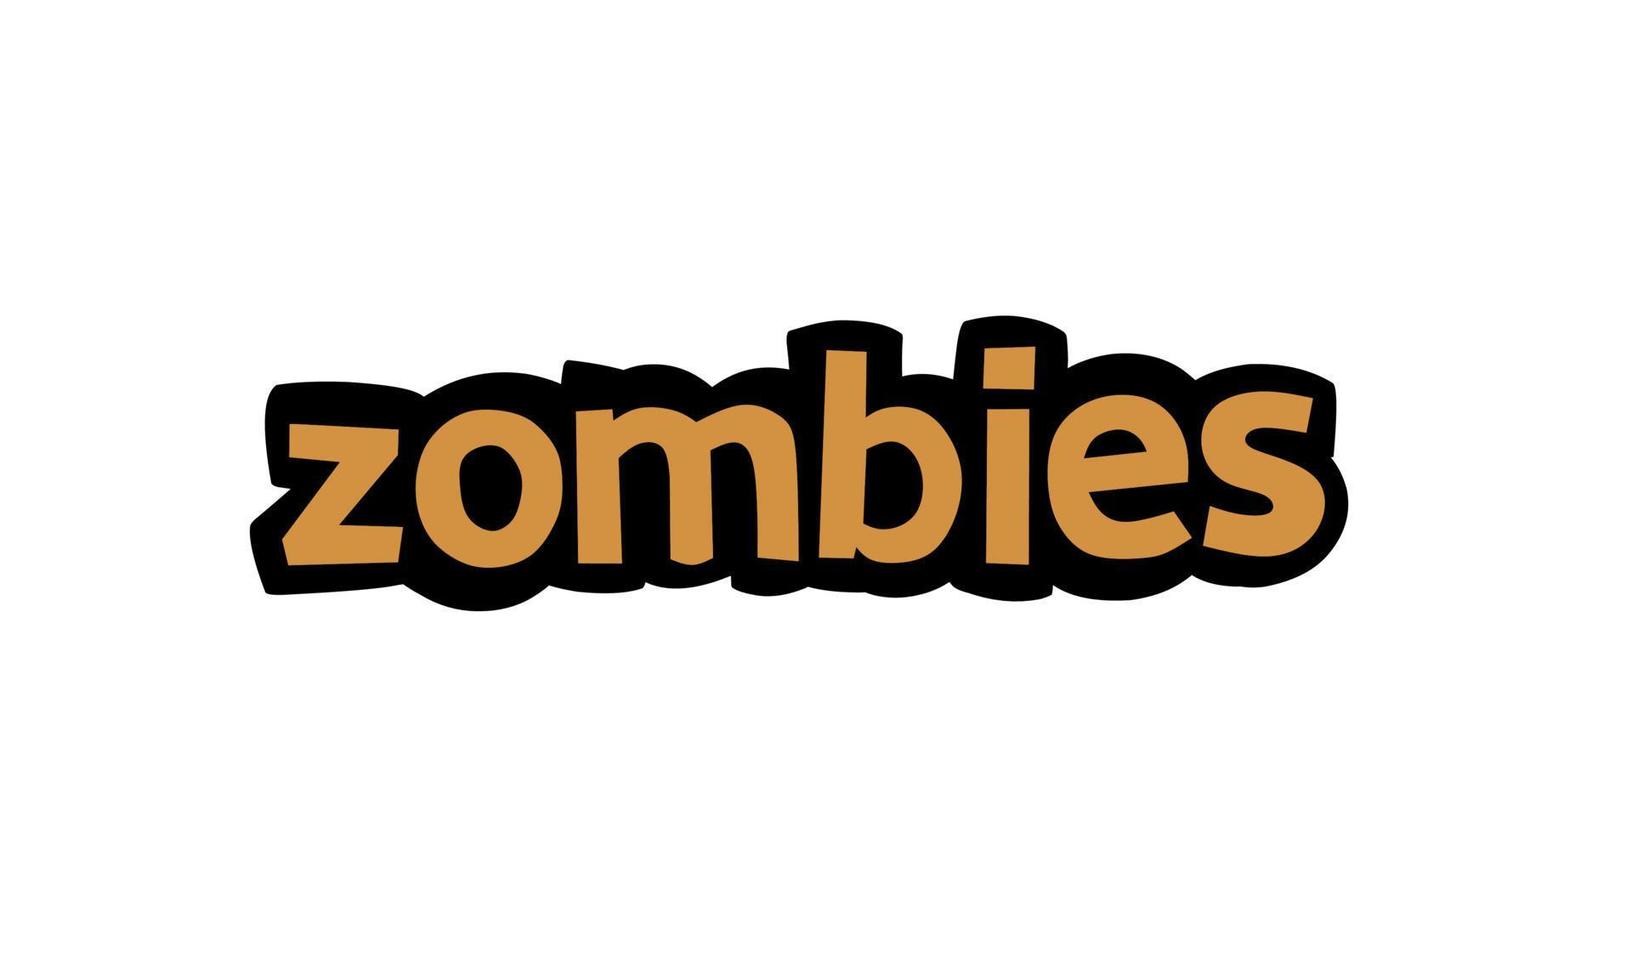 ZOMBIES writing vector design on white background